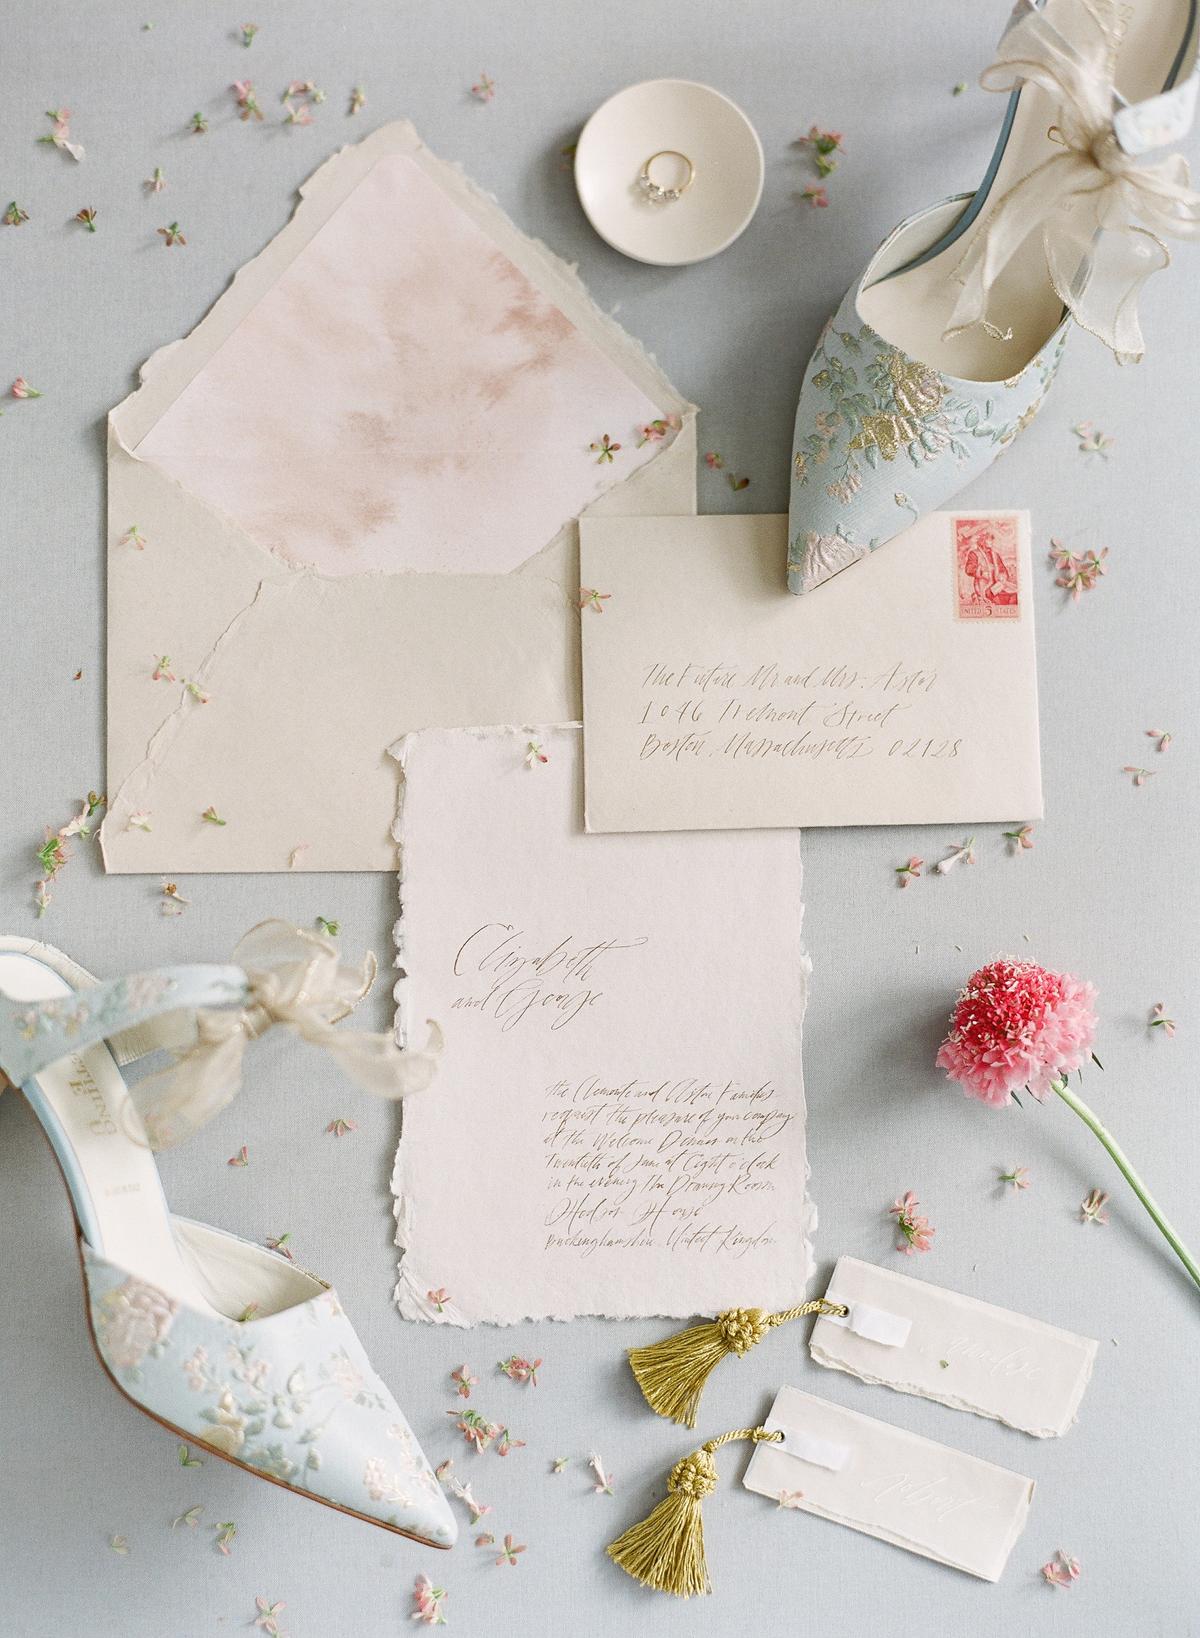 chinoiserie bridal heels with gossamer ribbon and Old World romantic wedding invitations with handwritten calligraphy; photography by Julie Livingston at an English country estate Hedsor House with planning and design by Willow and Oak Events